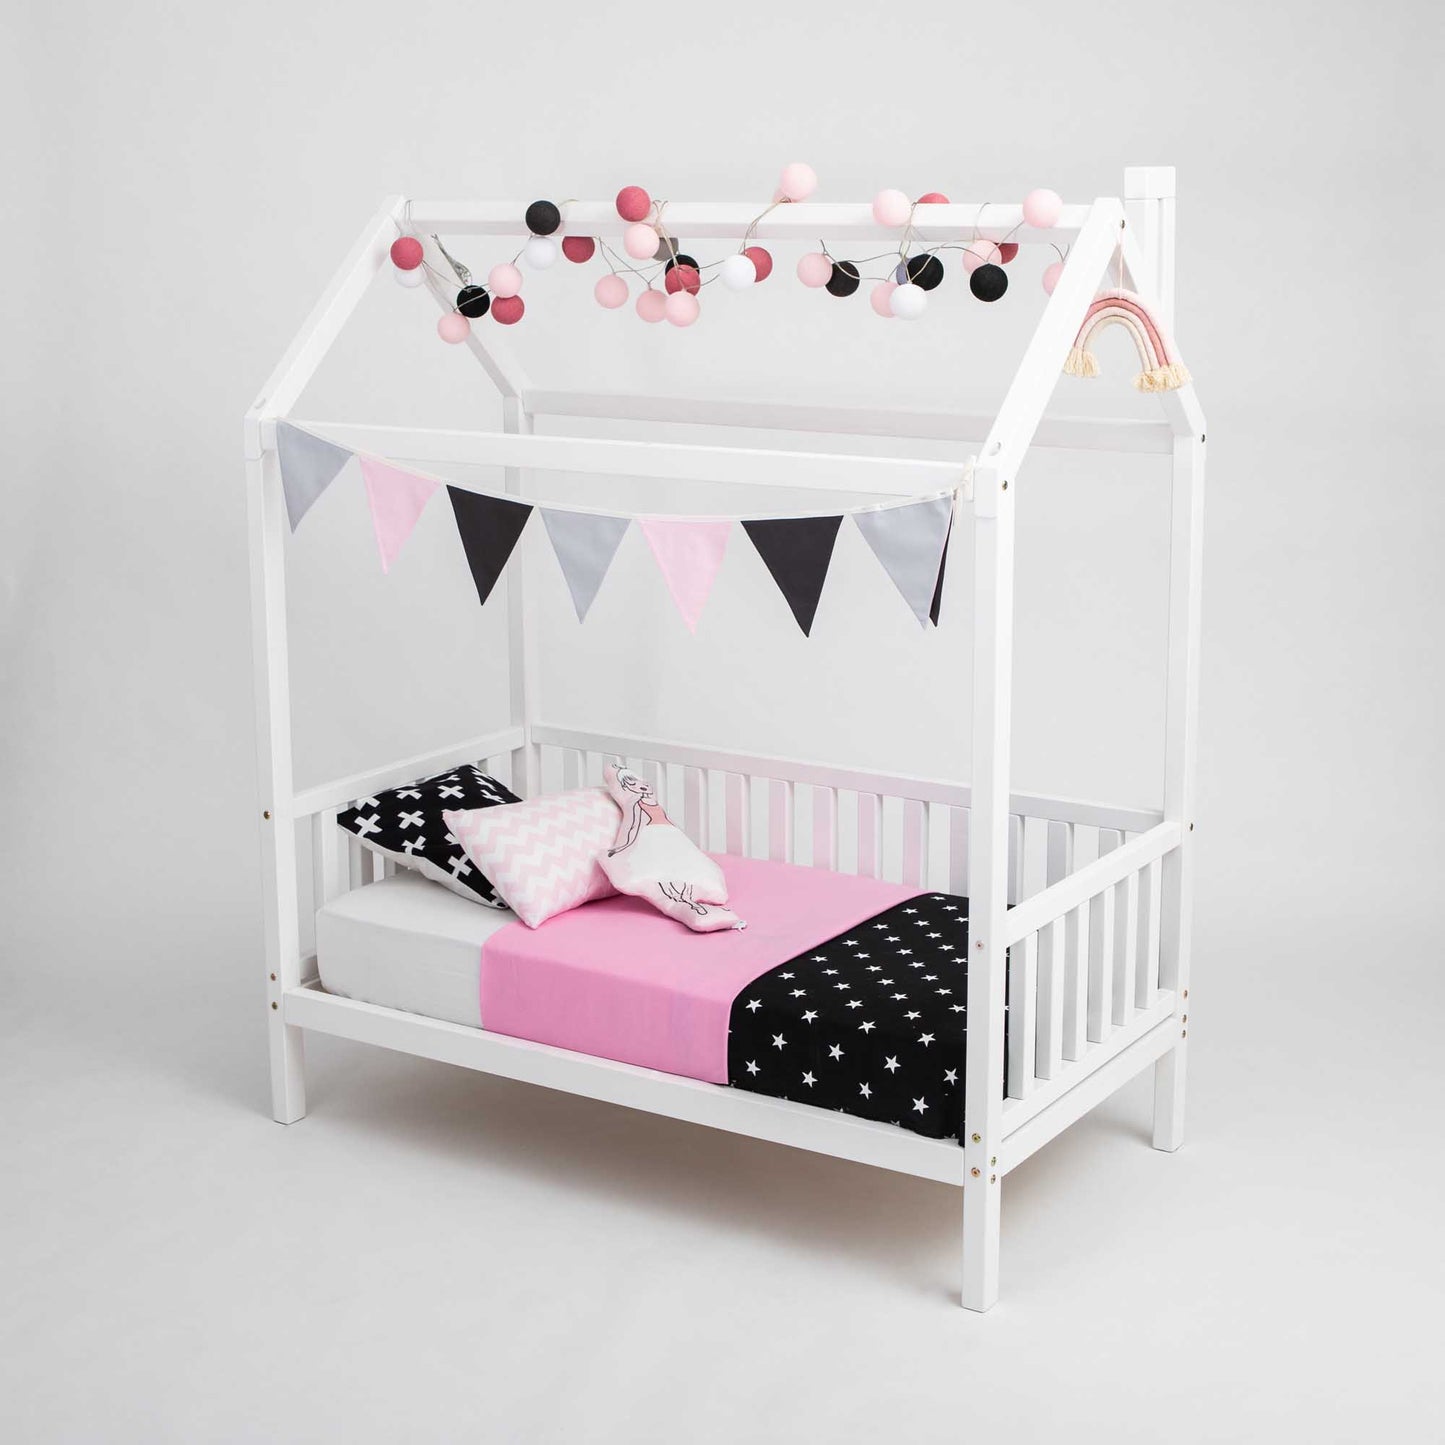 A raised house bed on legs with 3-sided rails, with pink and black polka dot bedding.